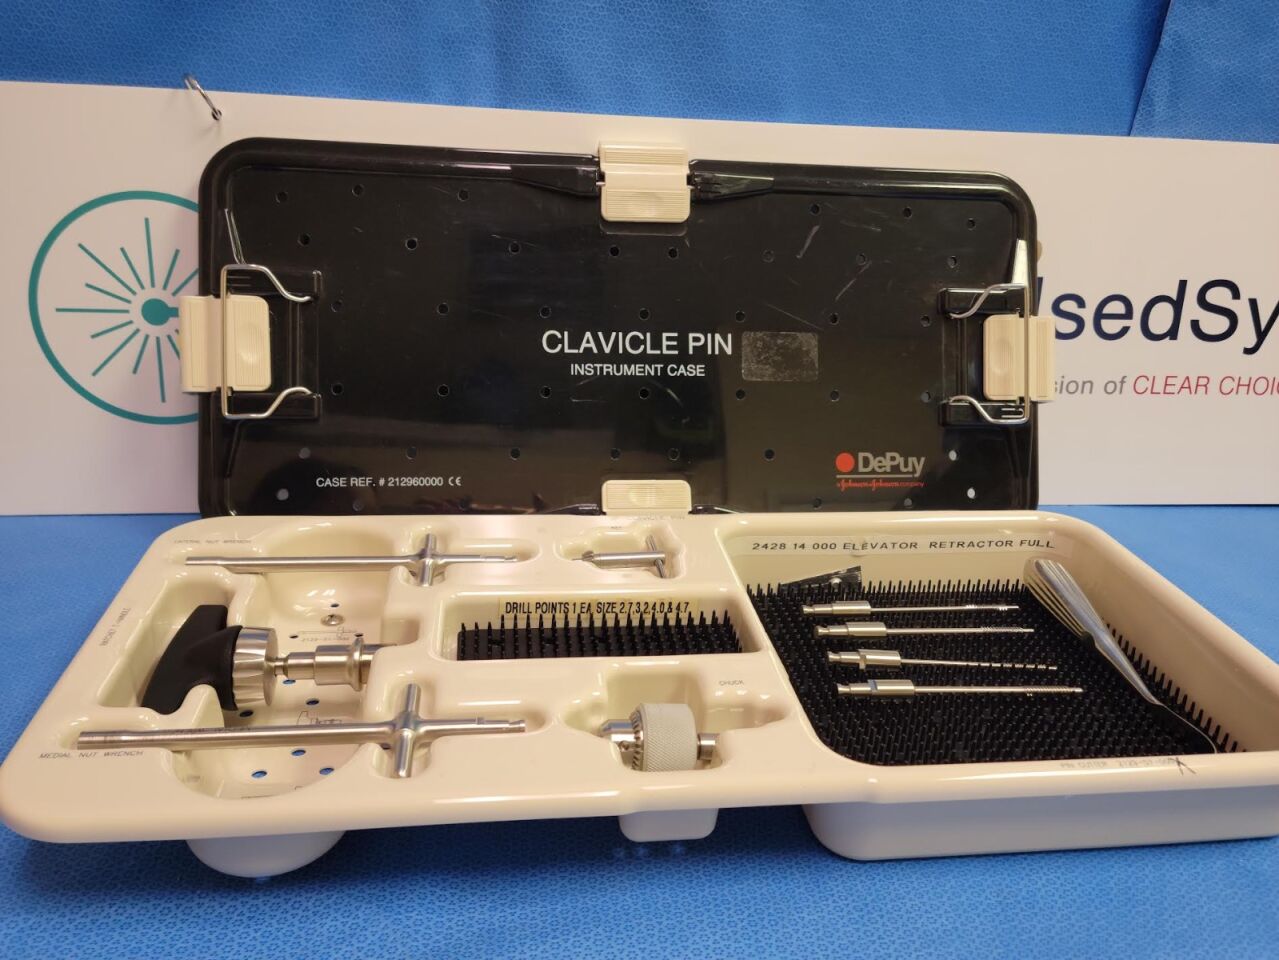 Depuy Clavicle Pin Instrument Set CCMED57